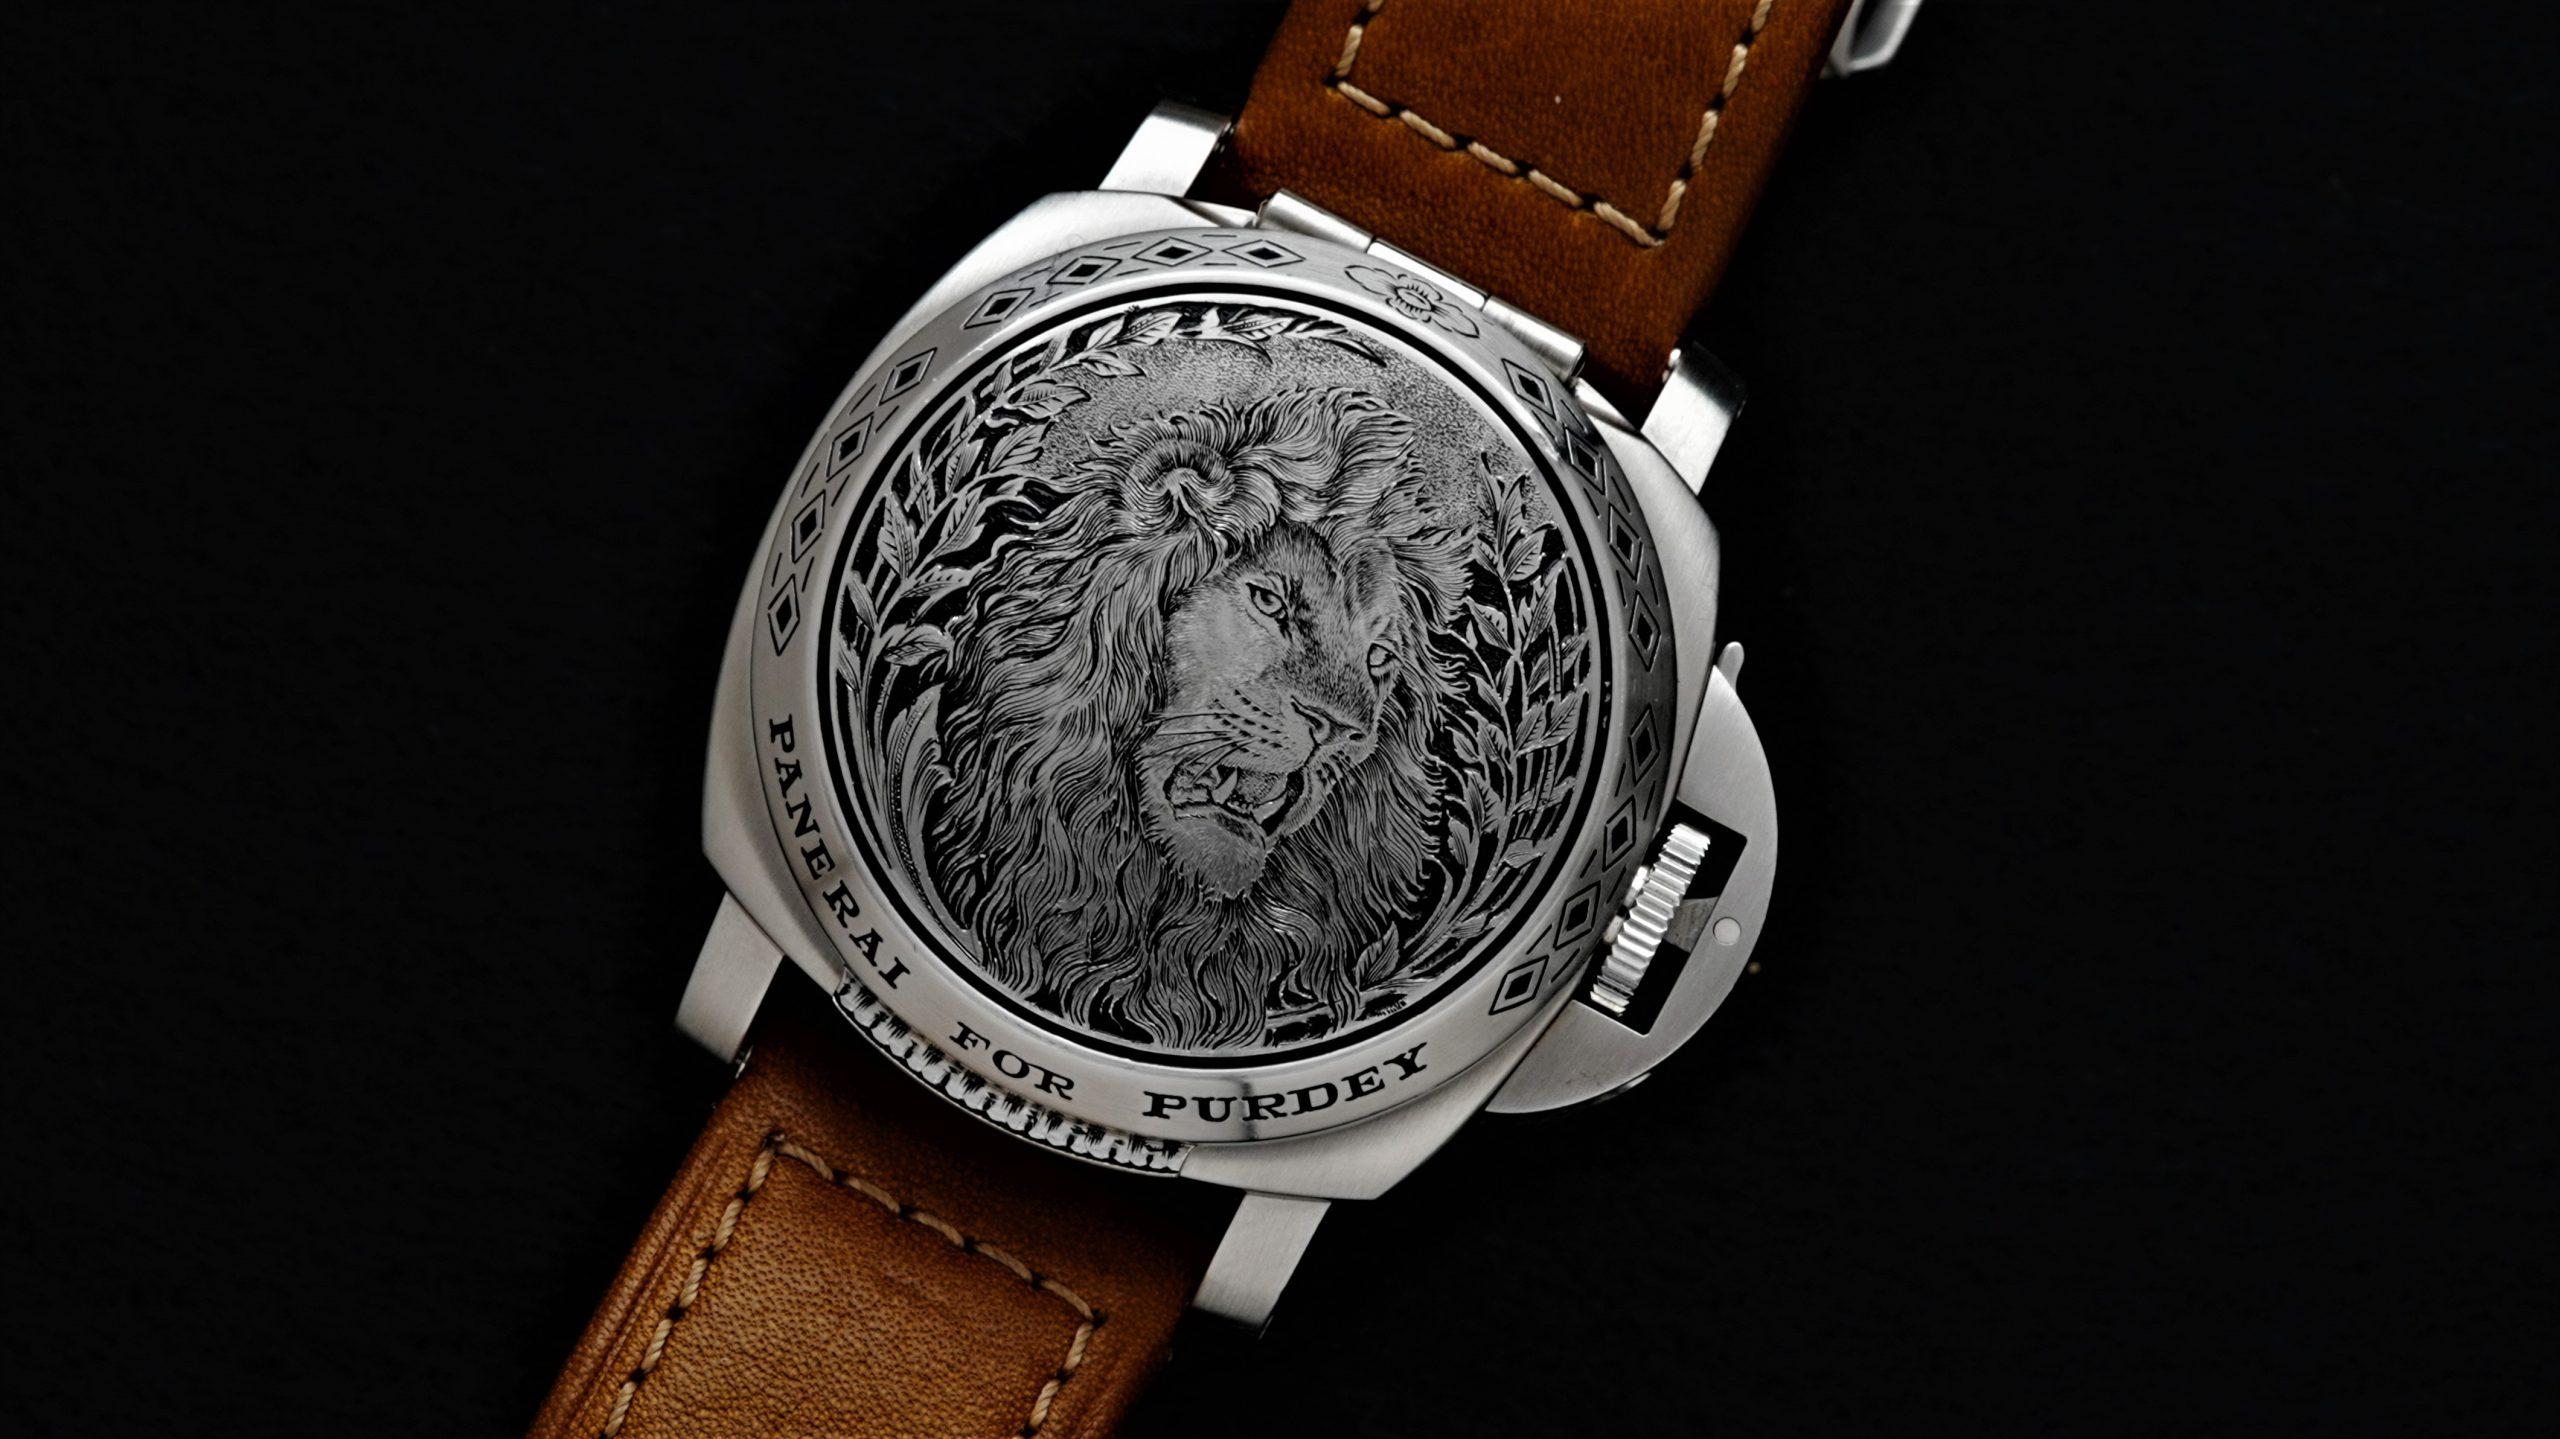 Panerai Luminor For Purdey Limired Edition front face of case.